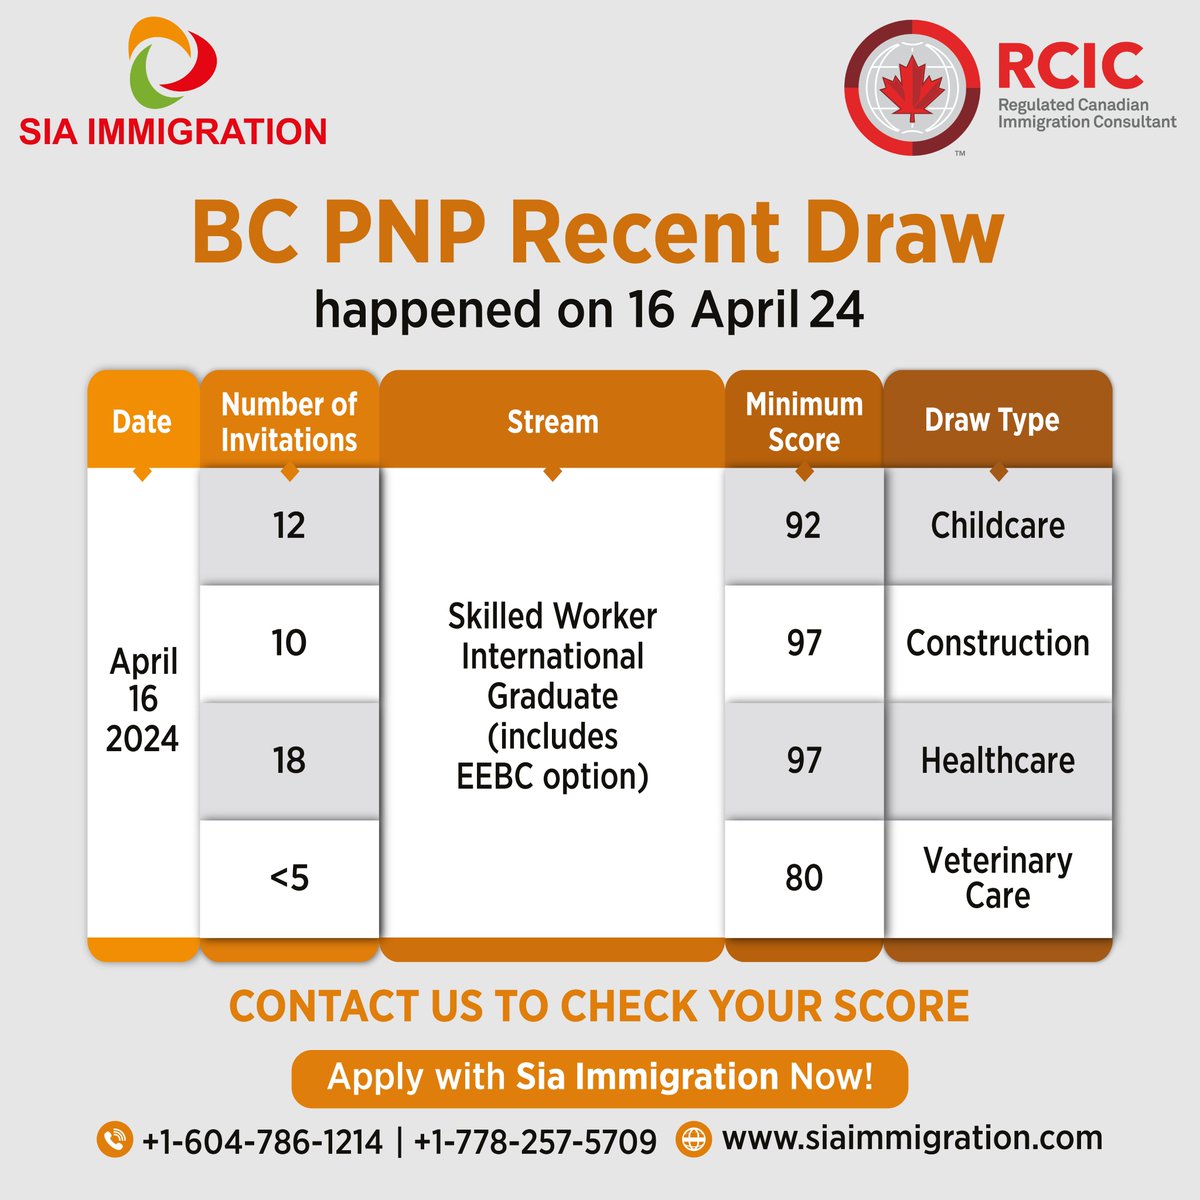 The BC PNP recent draw happened on 16 April 2024.

Apply with Sia Immigration Now @ +1-604-786-1214, +1-778-257-5709

#BCPNP #bcpnpDraw #PNPDraw2024 #16april #LatestDrawPNP #BritishColumbia #ProvinceNomineeProgram #SkilledImmigration #SkilledWorkers #Consultant